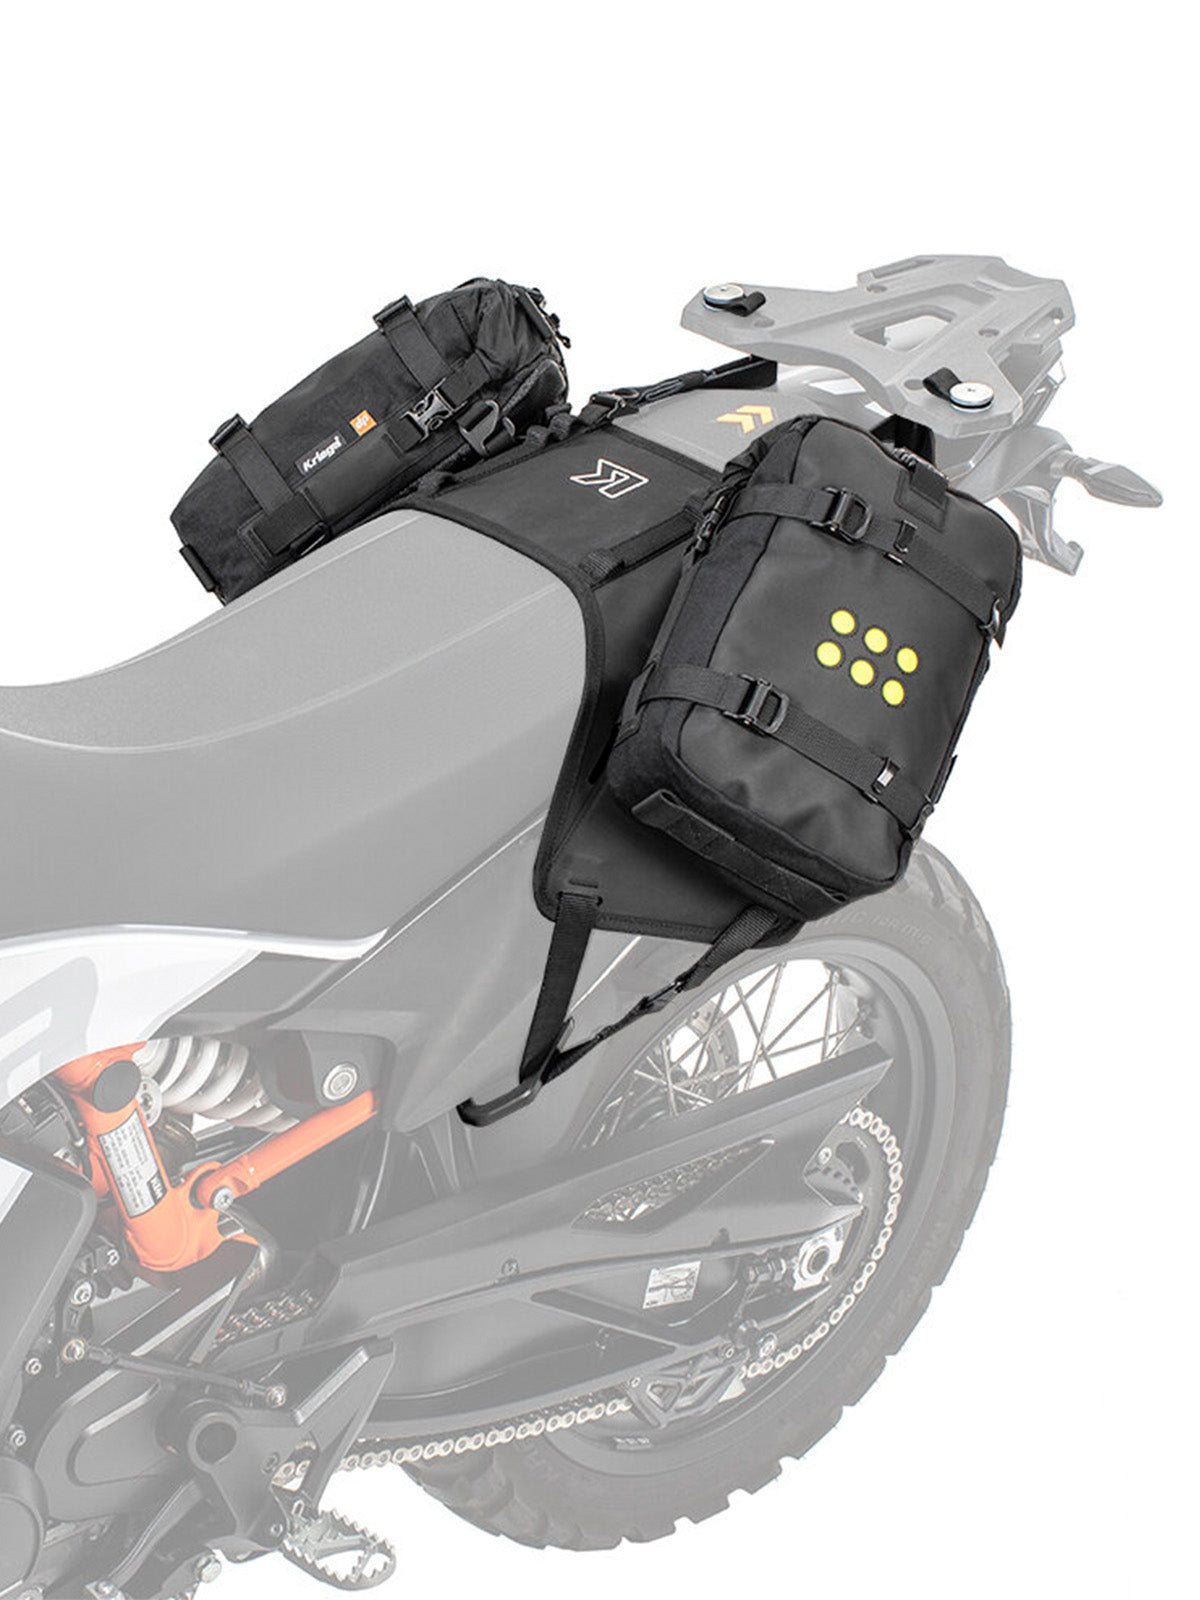 Kriega OS BASE KTM 790/890 with two os6 adventure packs